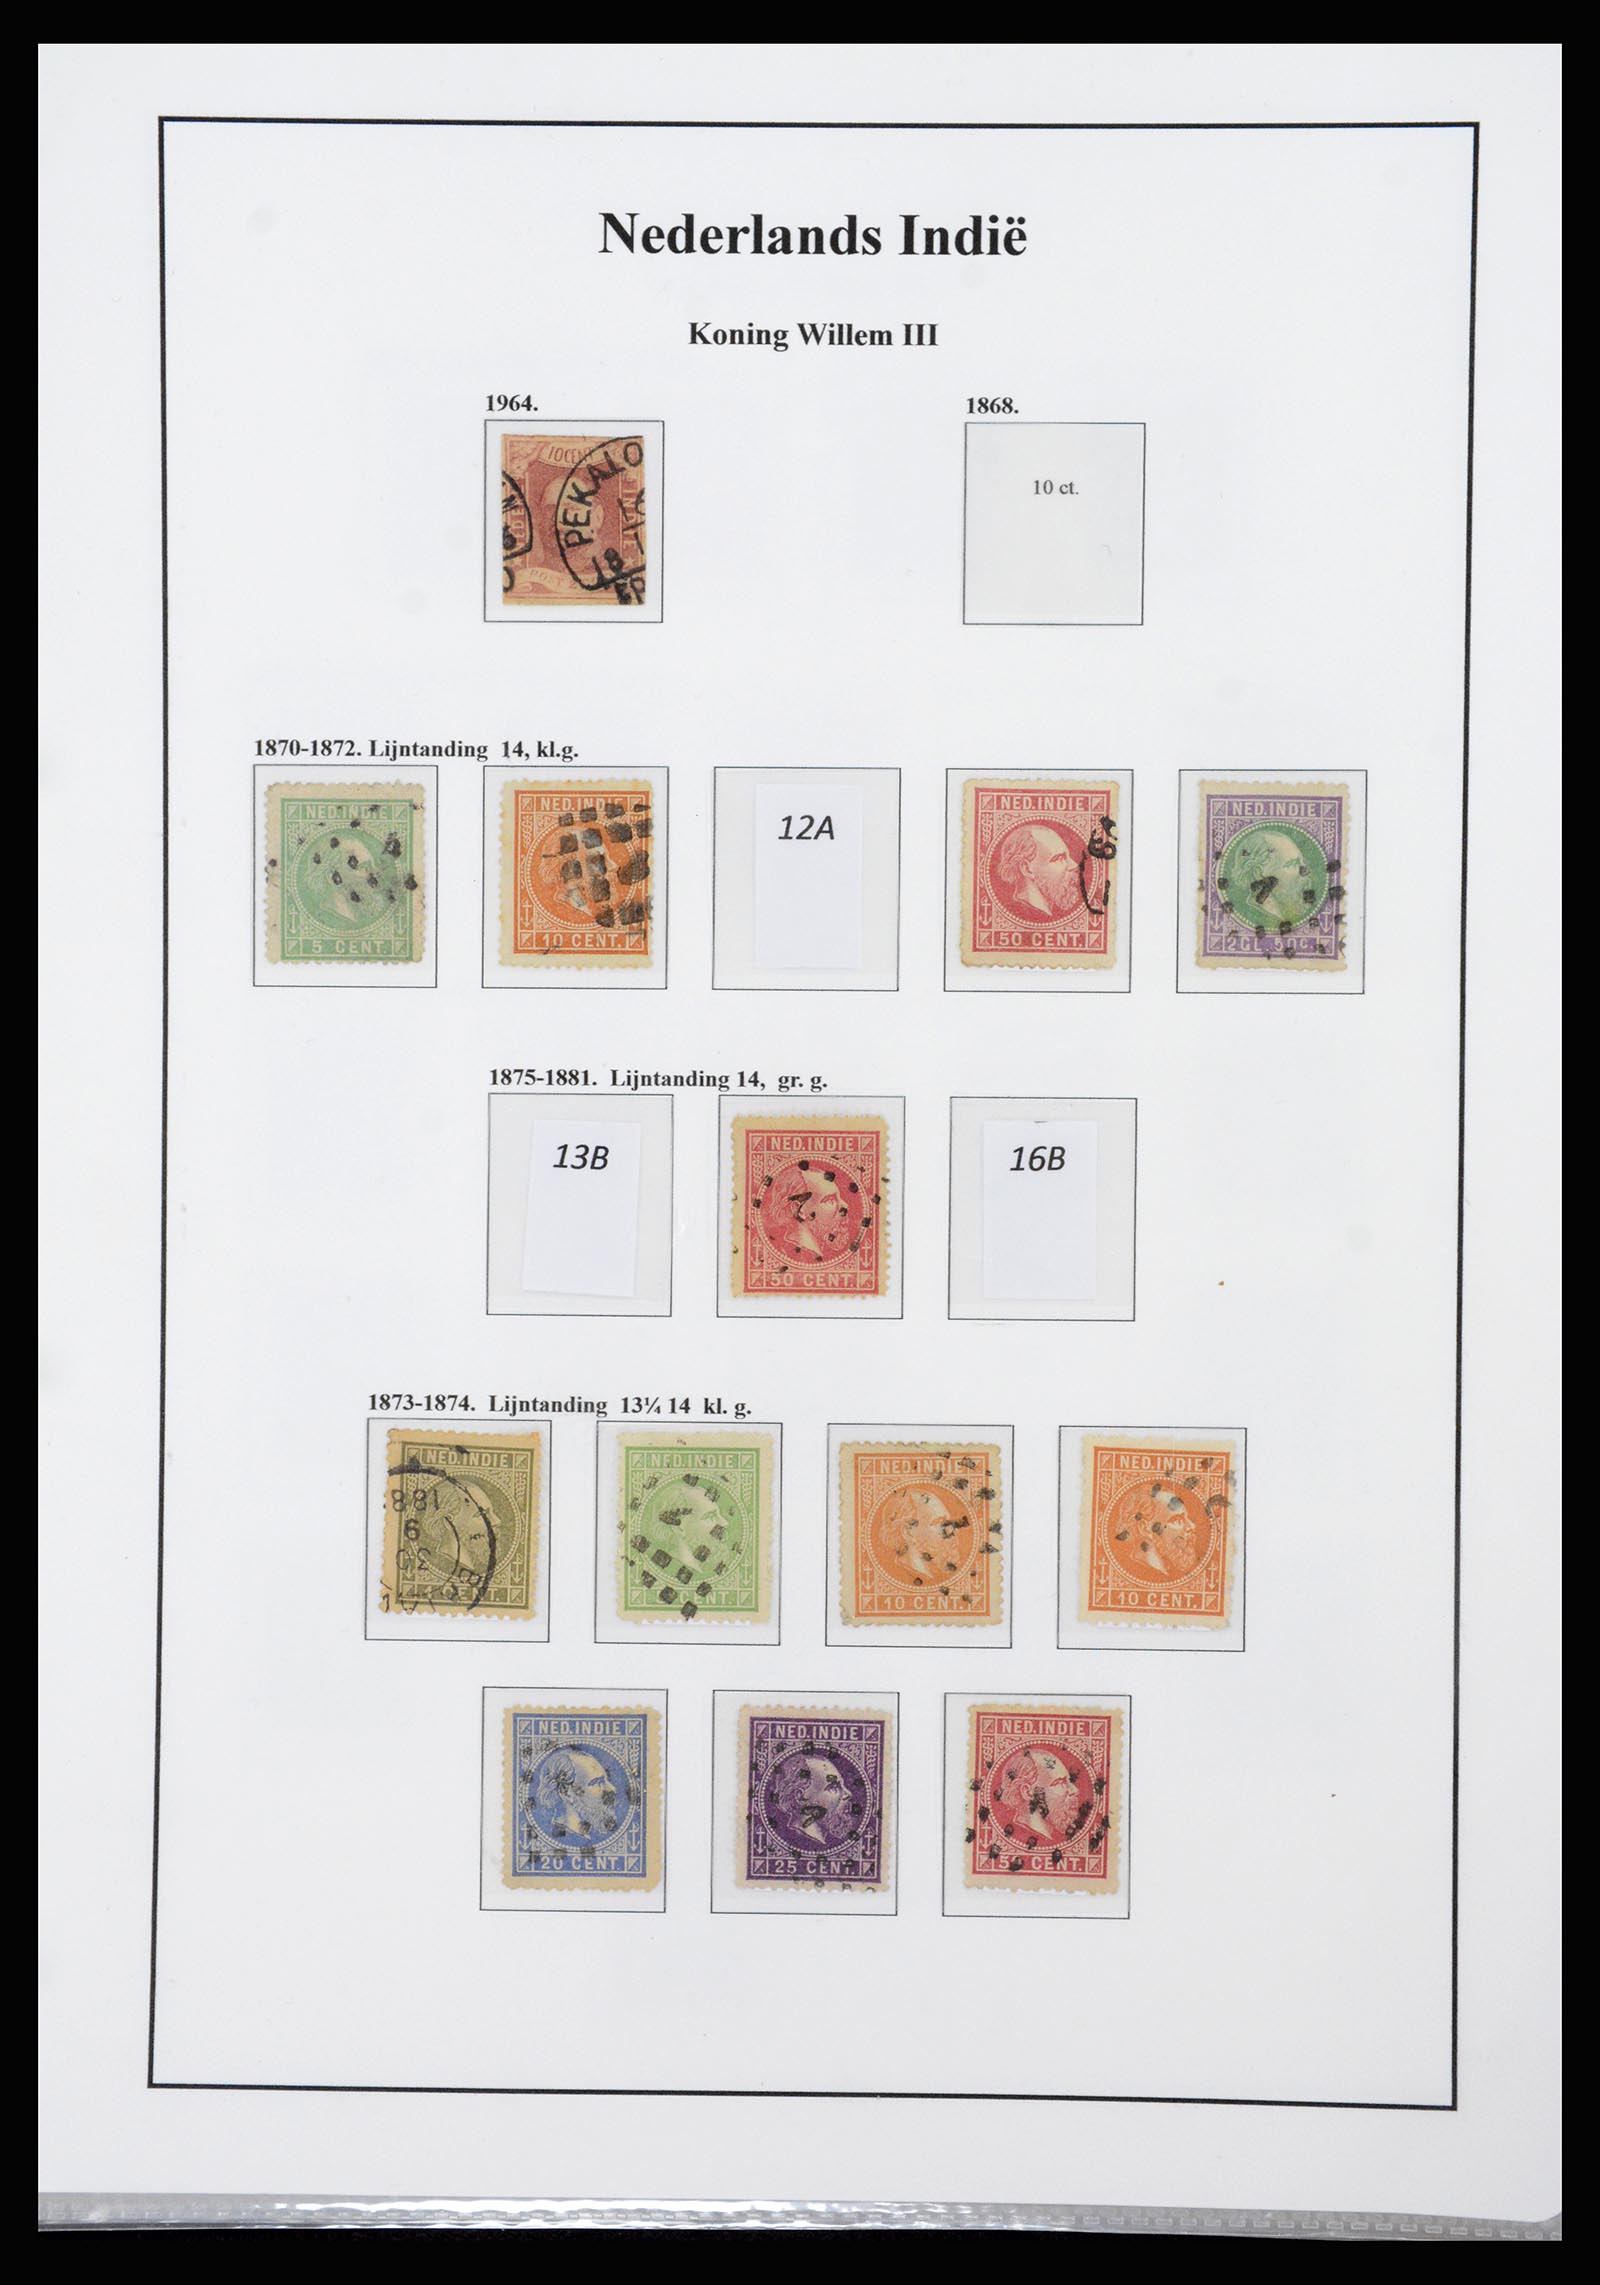 37247 001 - Stamp collection 37247 Dutch east Indies 1864-1949.